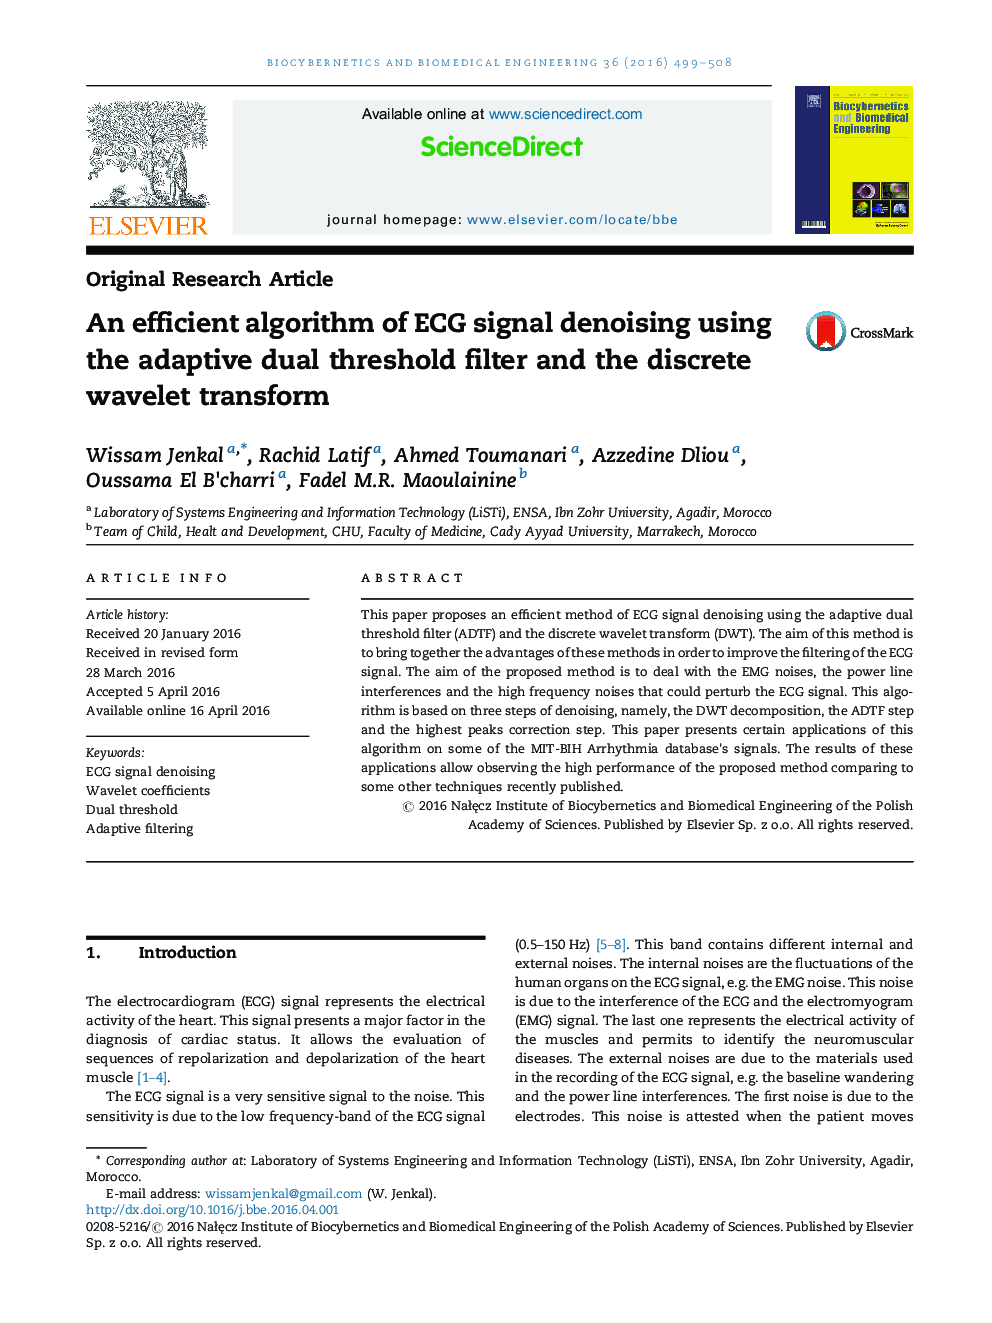 An efficient algorithm of ECG signal denoising using the adaptive dual threshold filter and the discrete wavelet transform